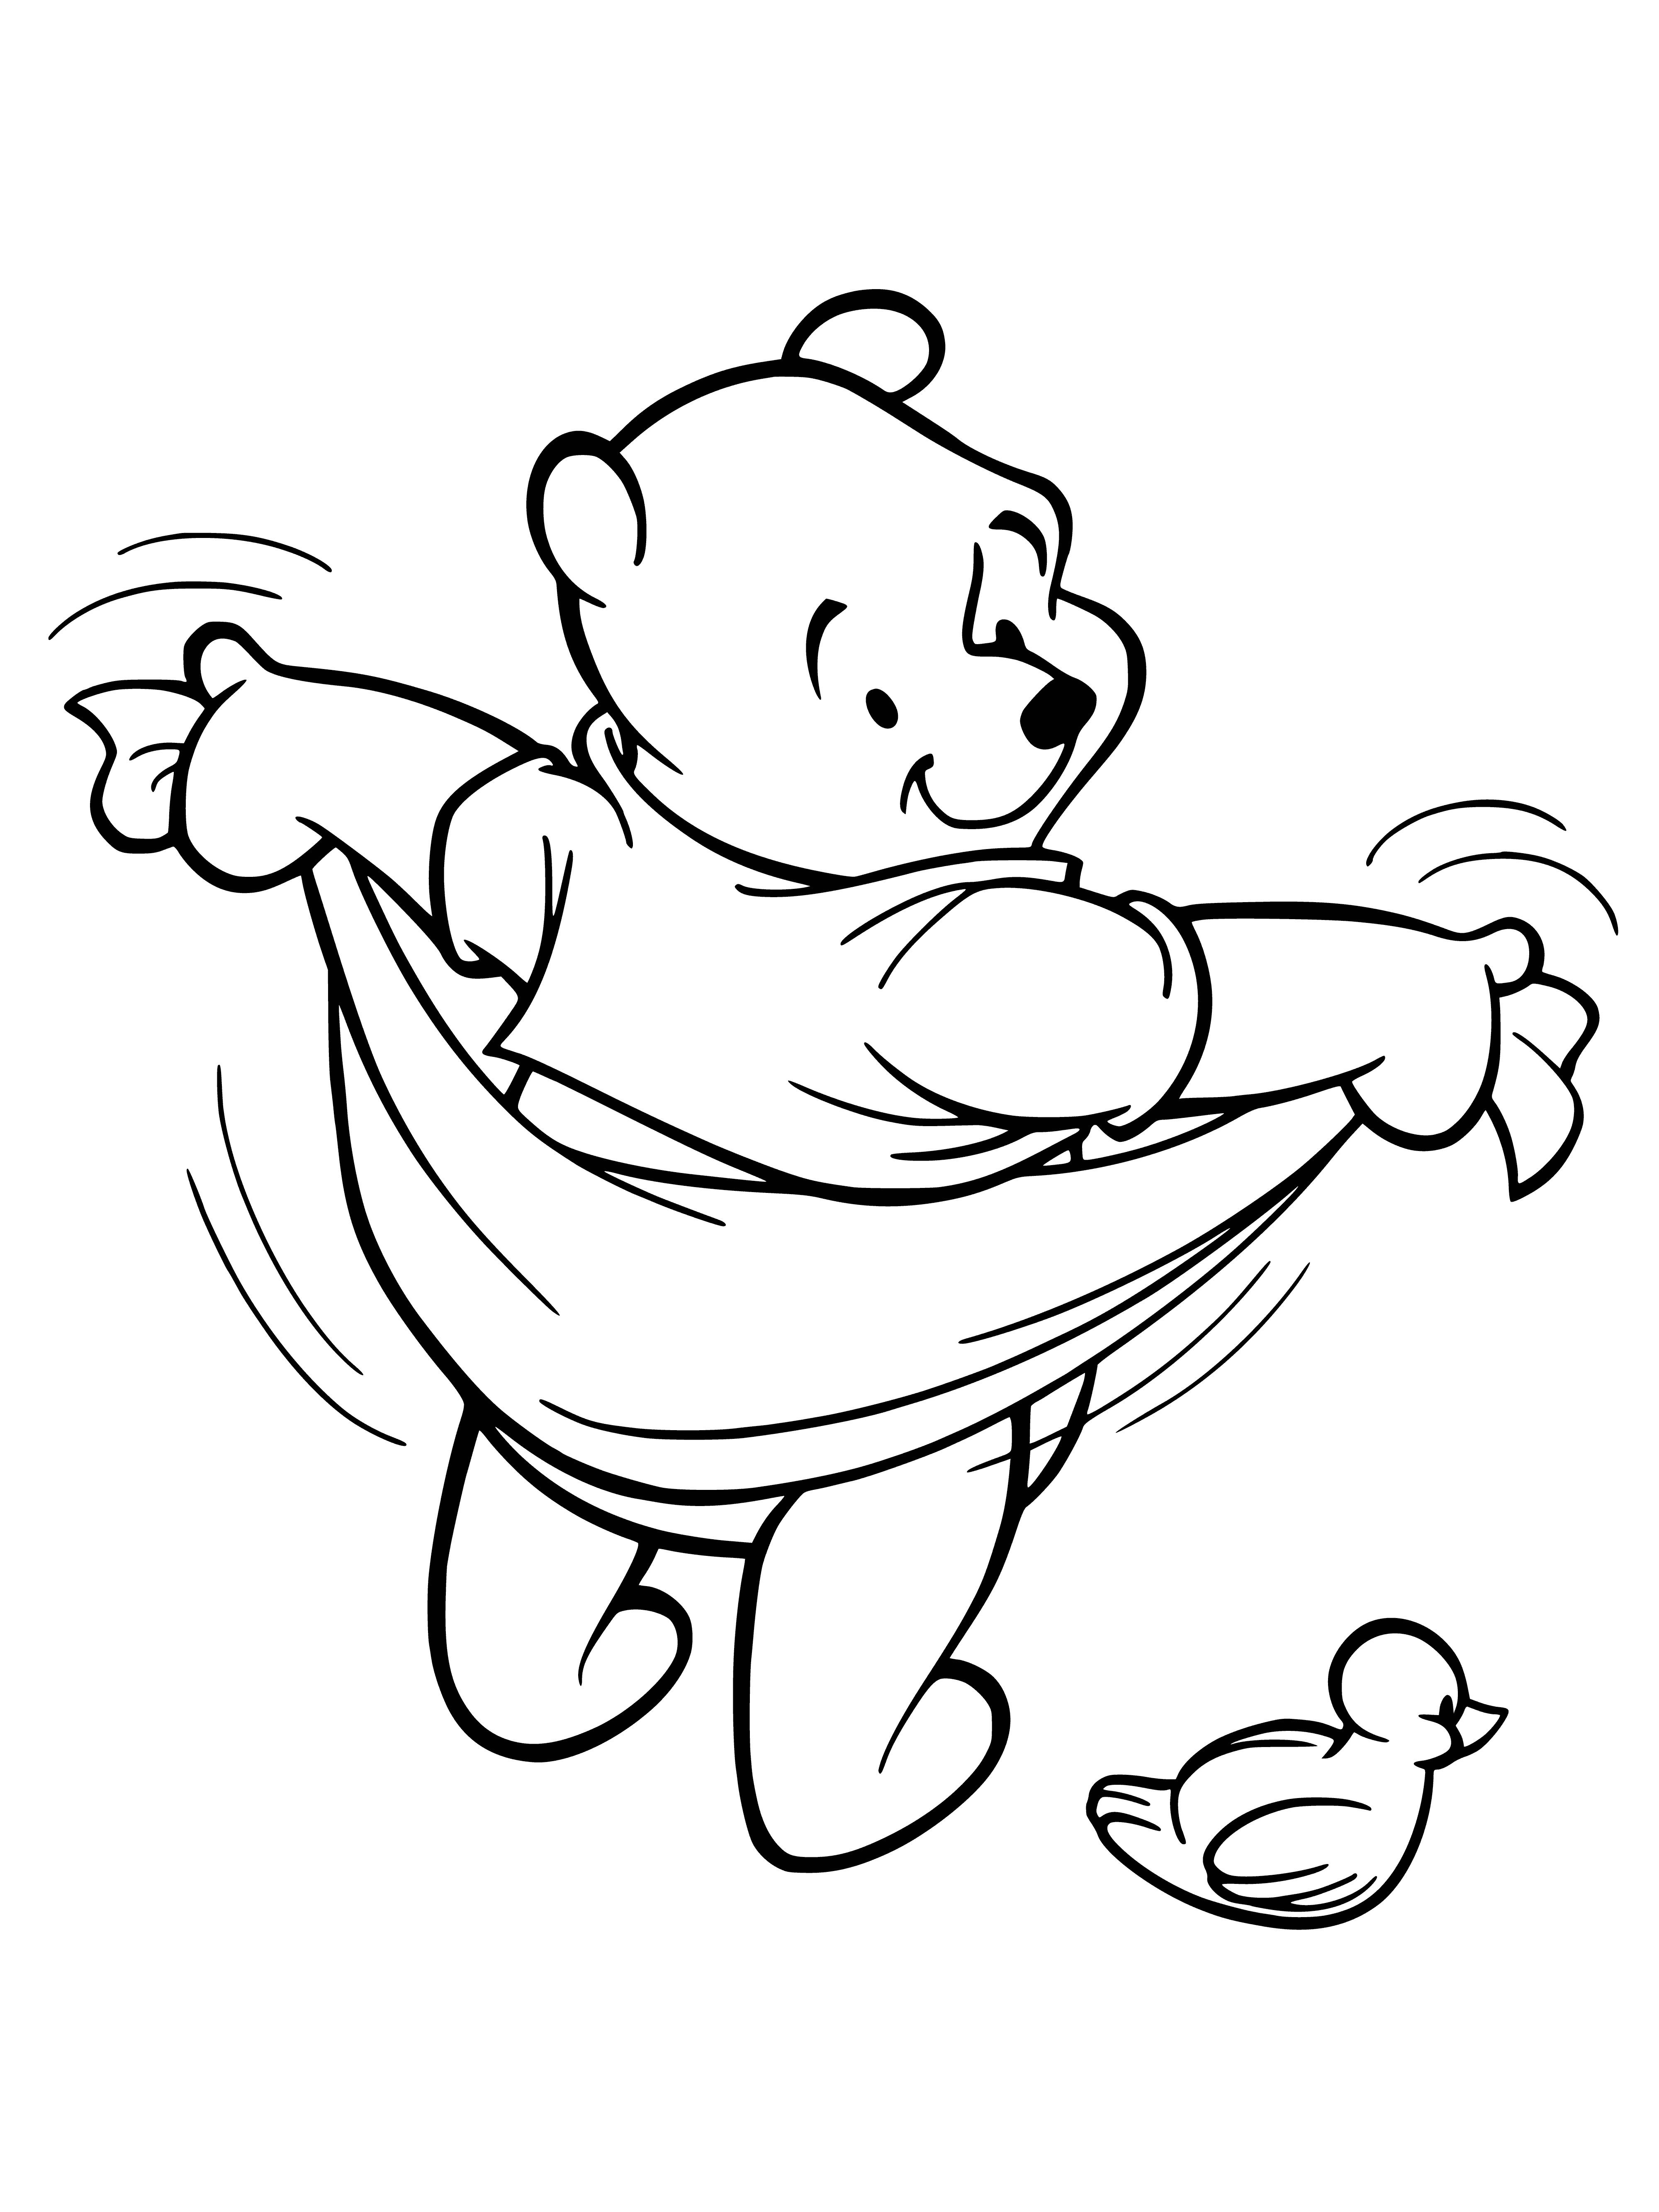 Winnie After Bath coloring page